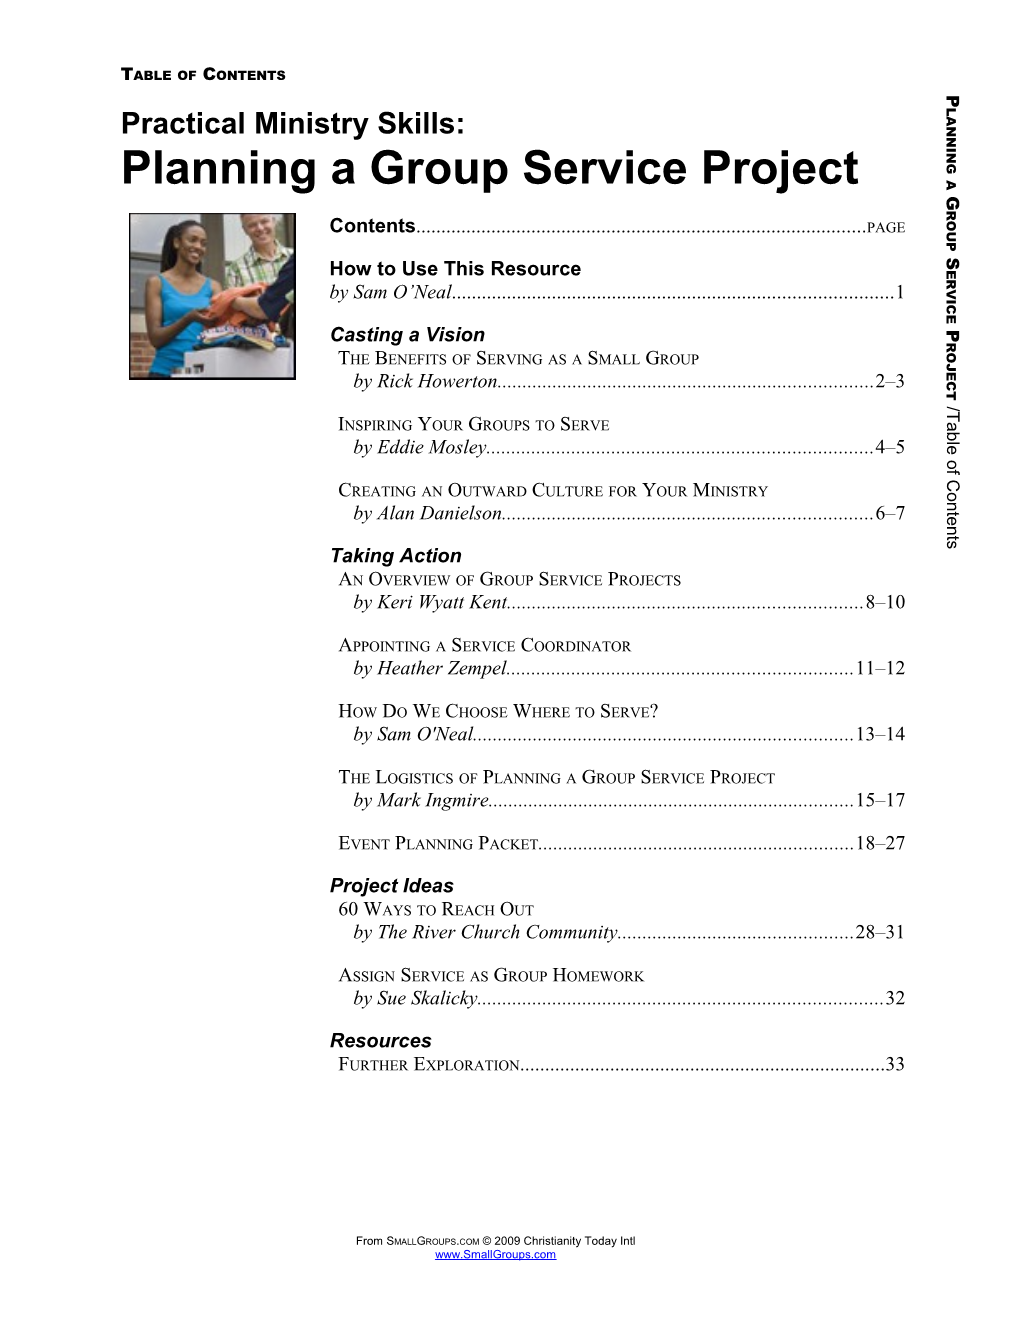 Practical Ministry Skills: Planning a Group Service Project